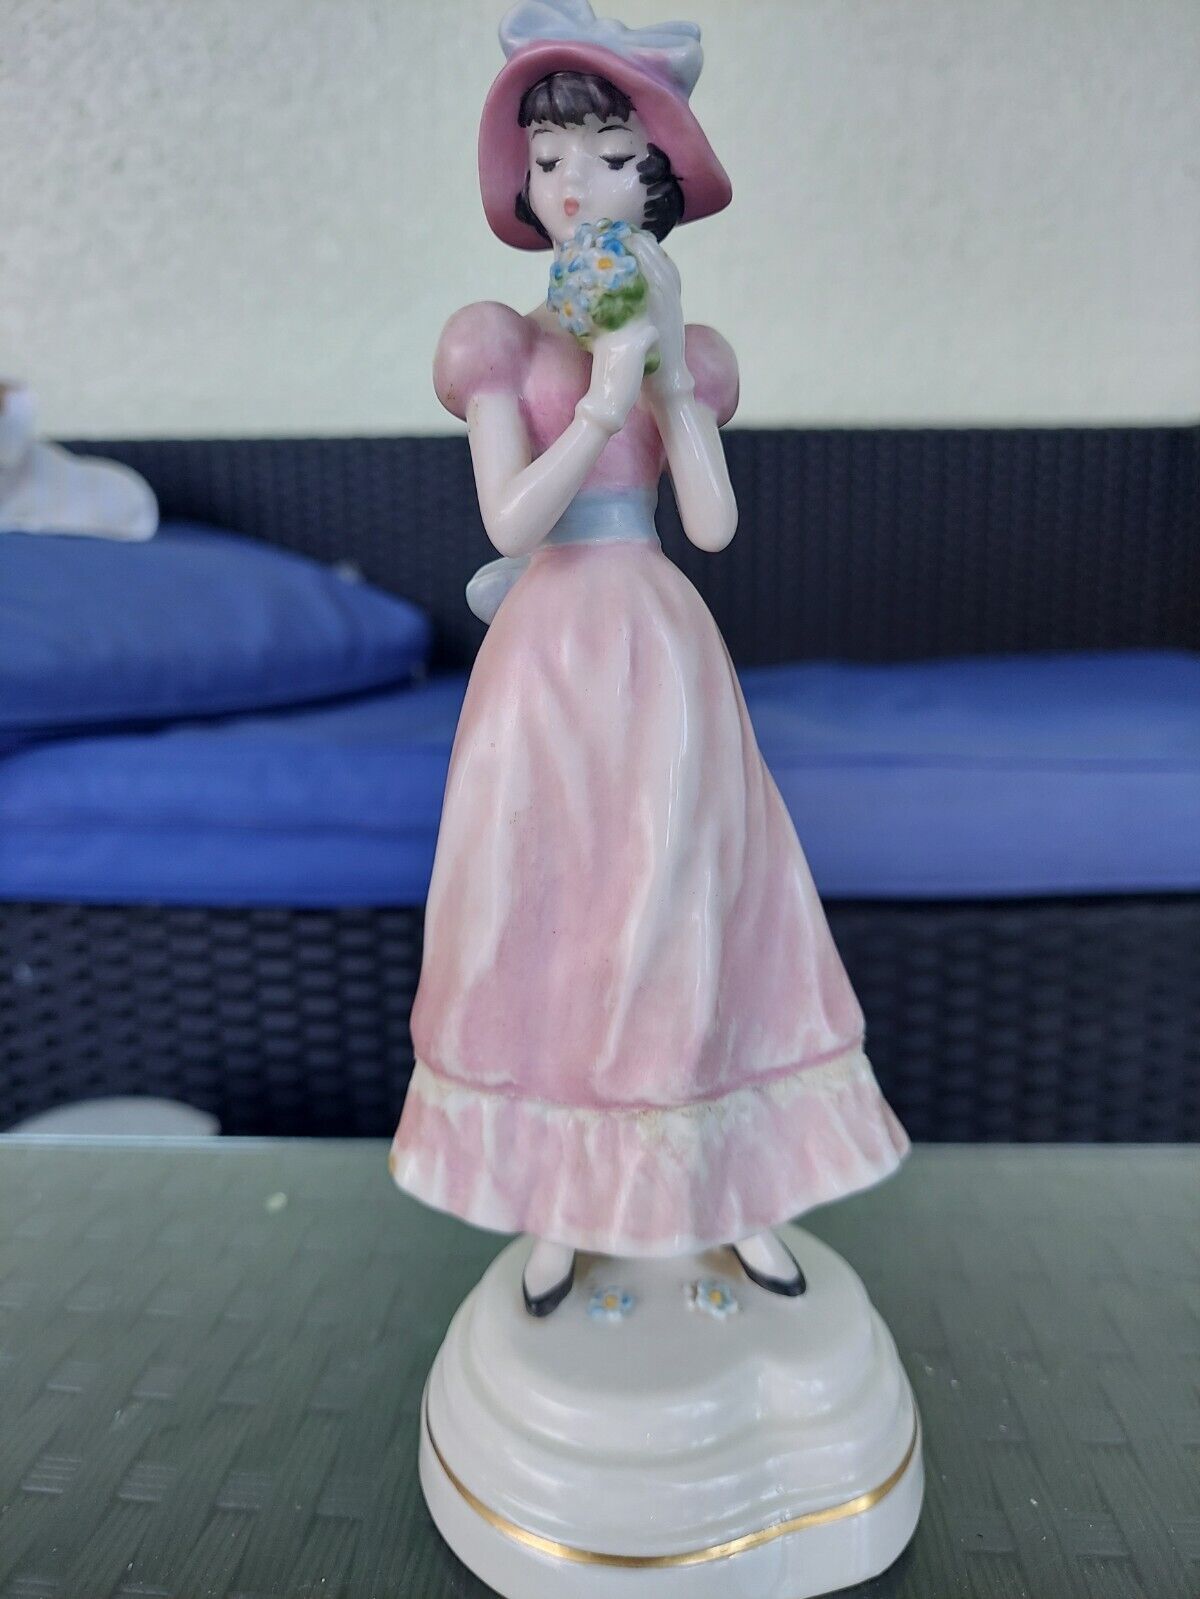 Goebel Huldah Figurine 701 Woman Lady With Bouquet- Made in 1959 -rare find